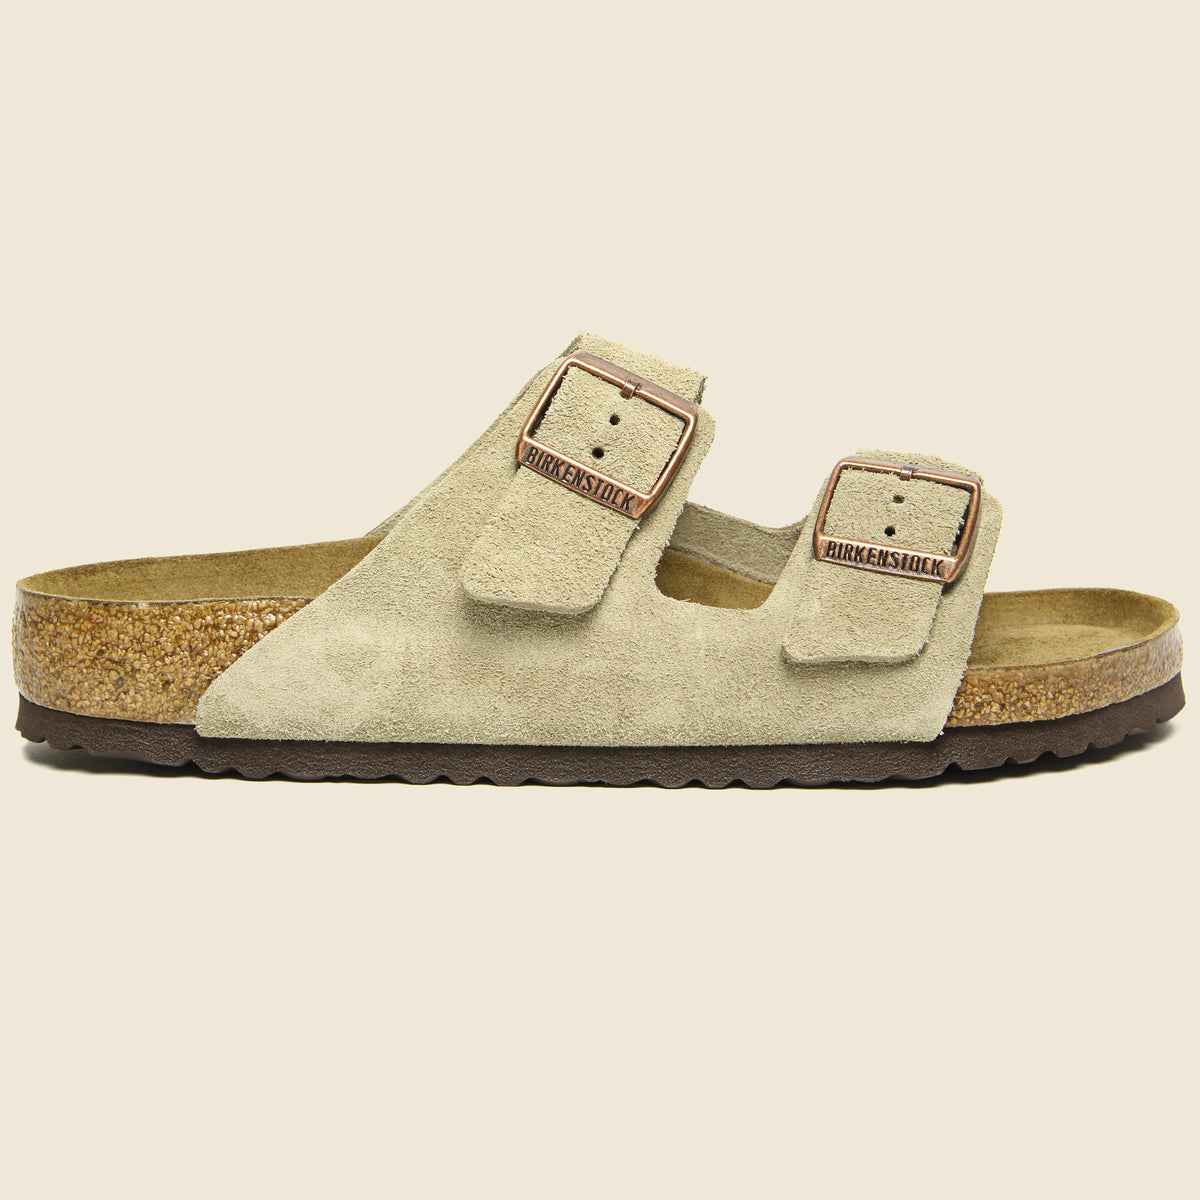 Birkenstock Arizona. Pair purchased in early/mid 2021 vs currently